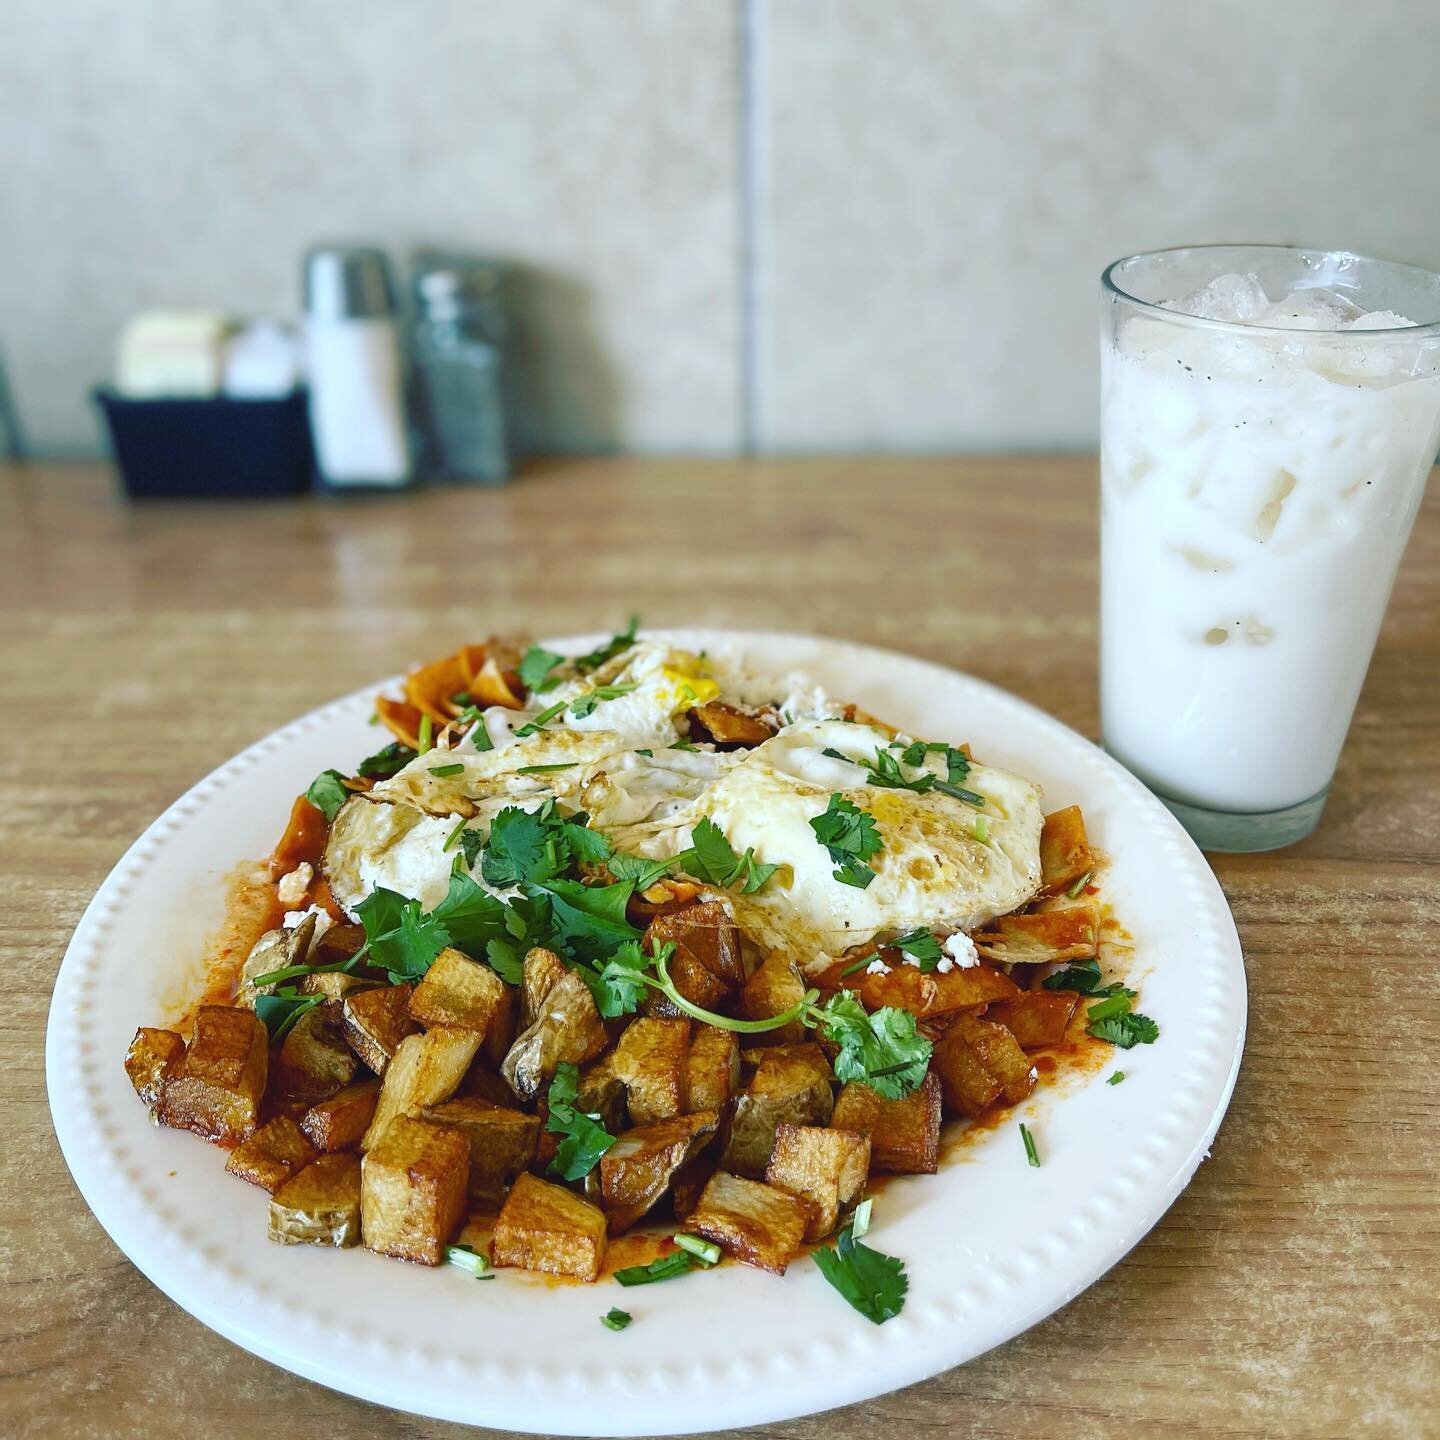 Chicken Chilaquiles 🤤
Open for dine-in and takeout!!
Call us at (520)748-1032!